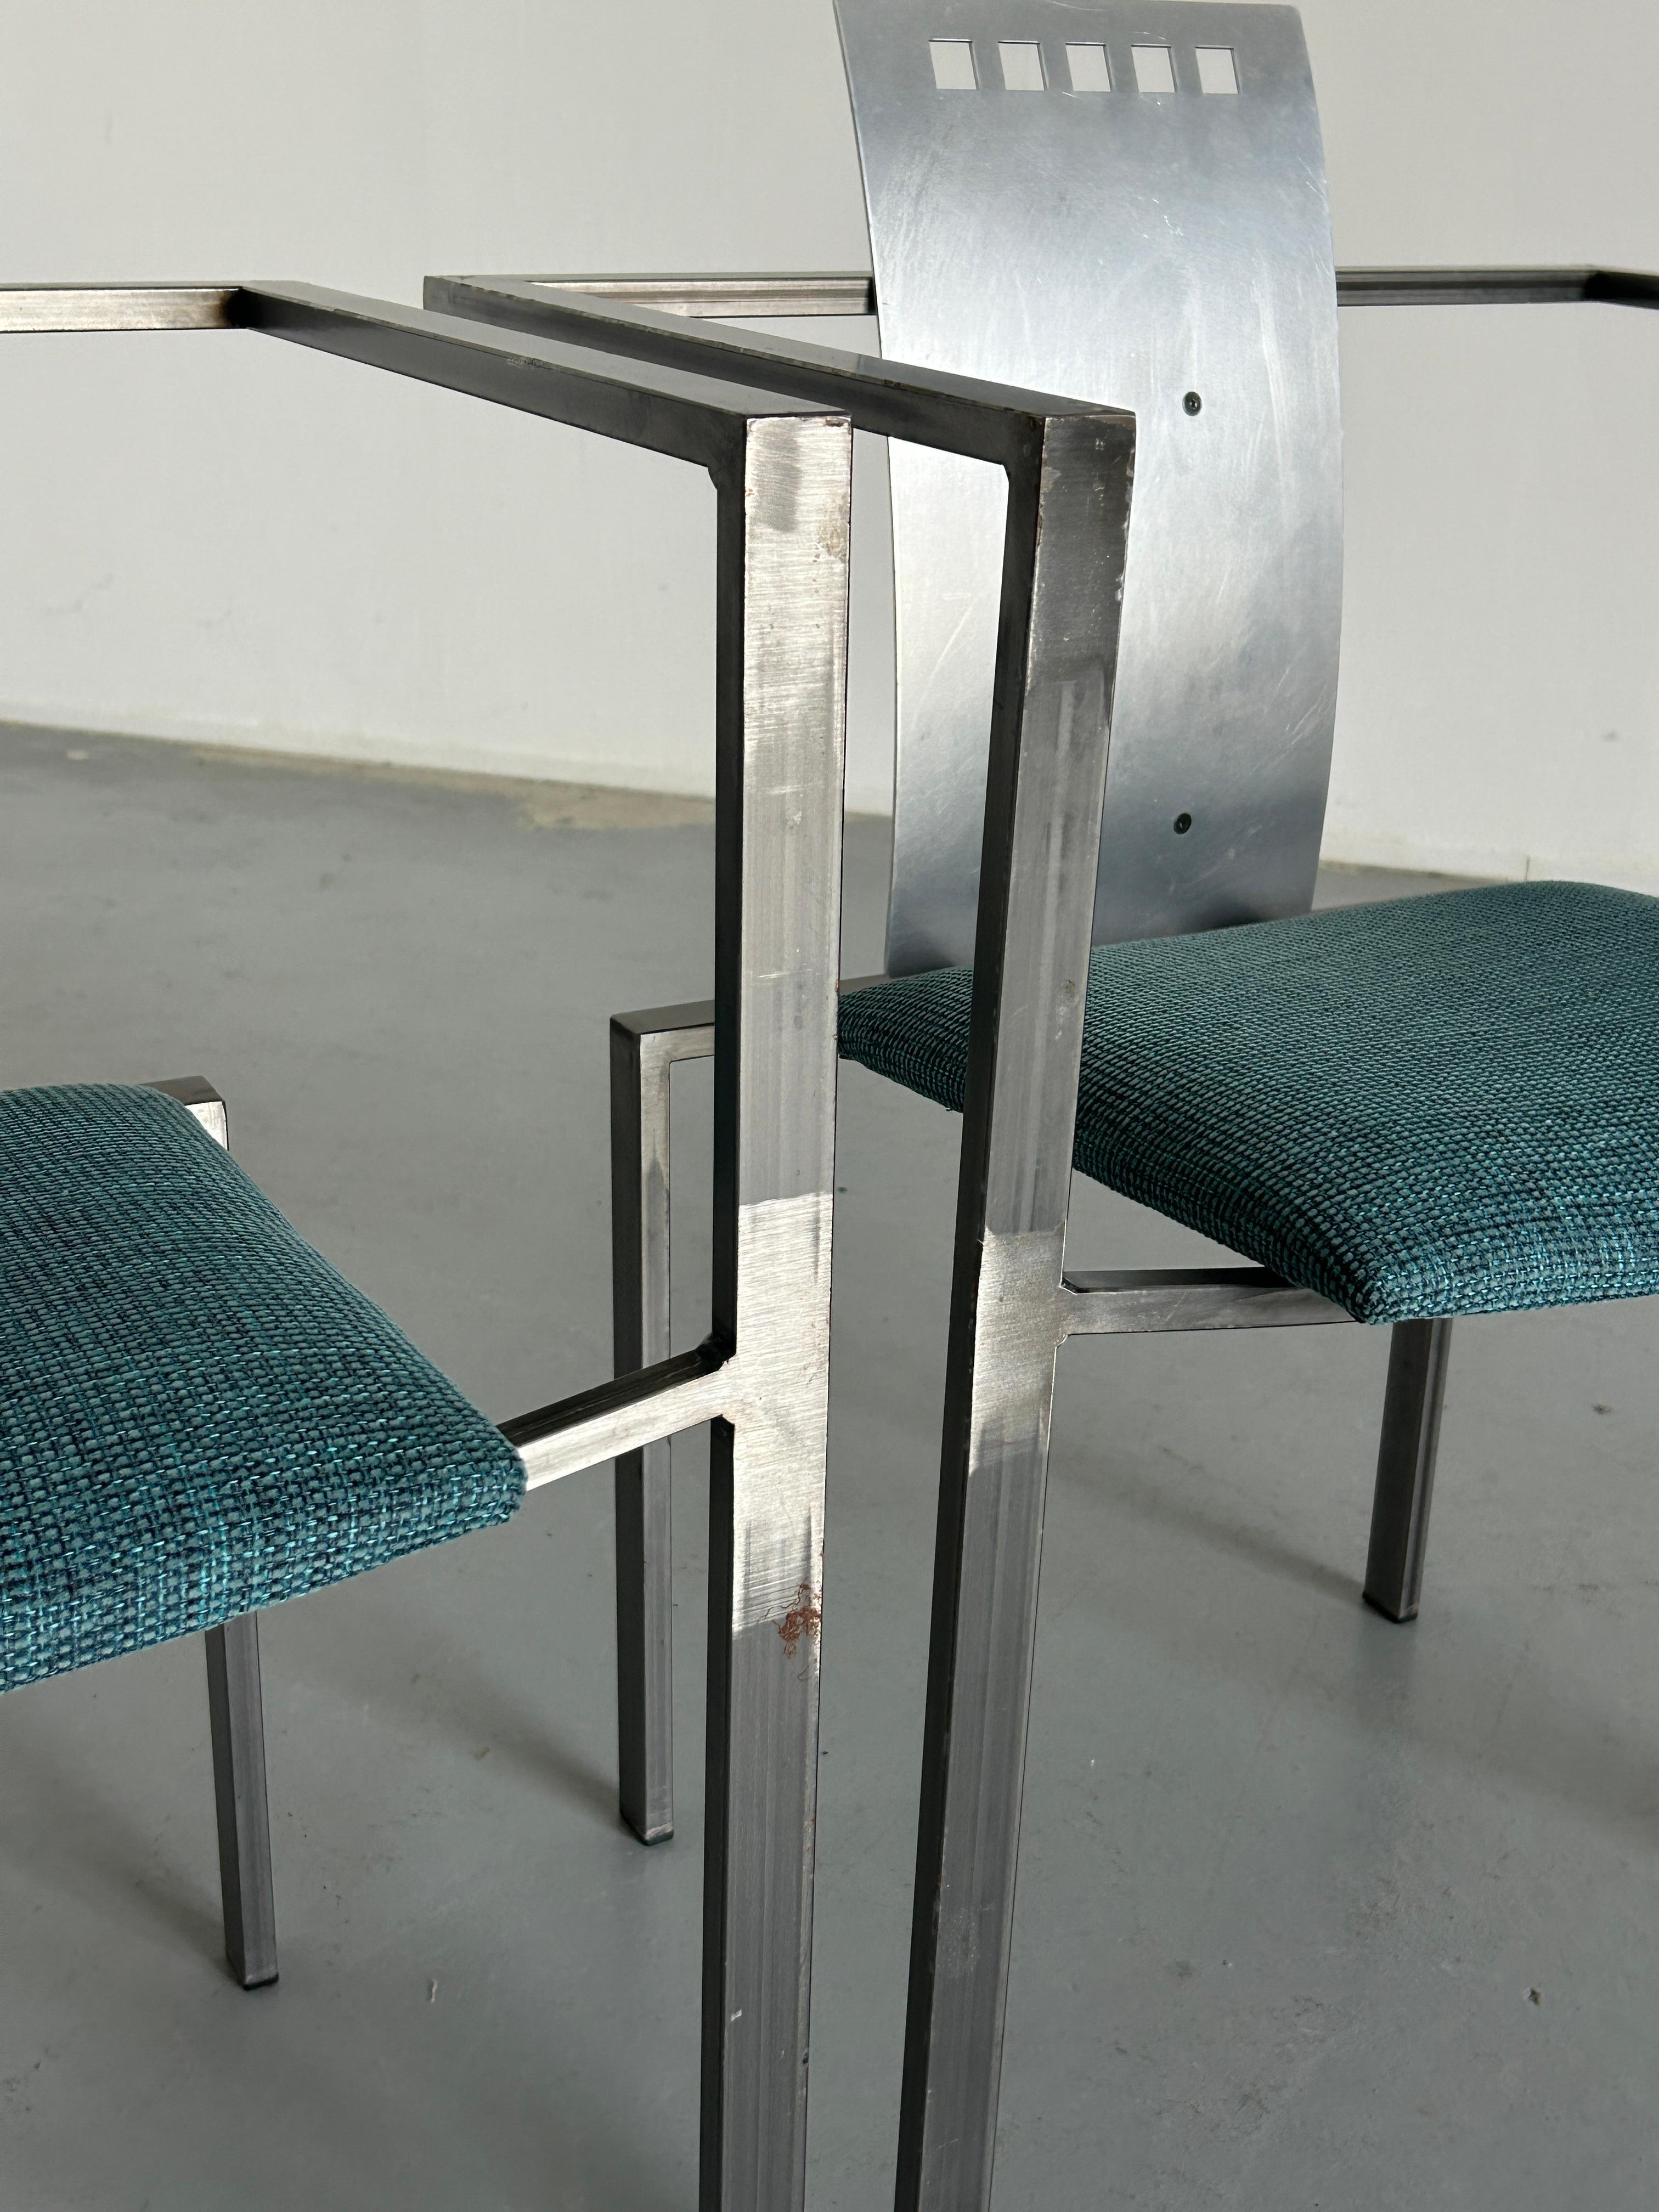 1 of 2 Memphis Design Postmodern Chairs by Karl Friedrich Förster for KFF, 1980s For Sale 4